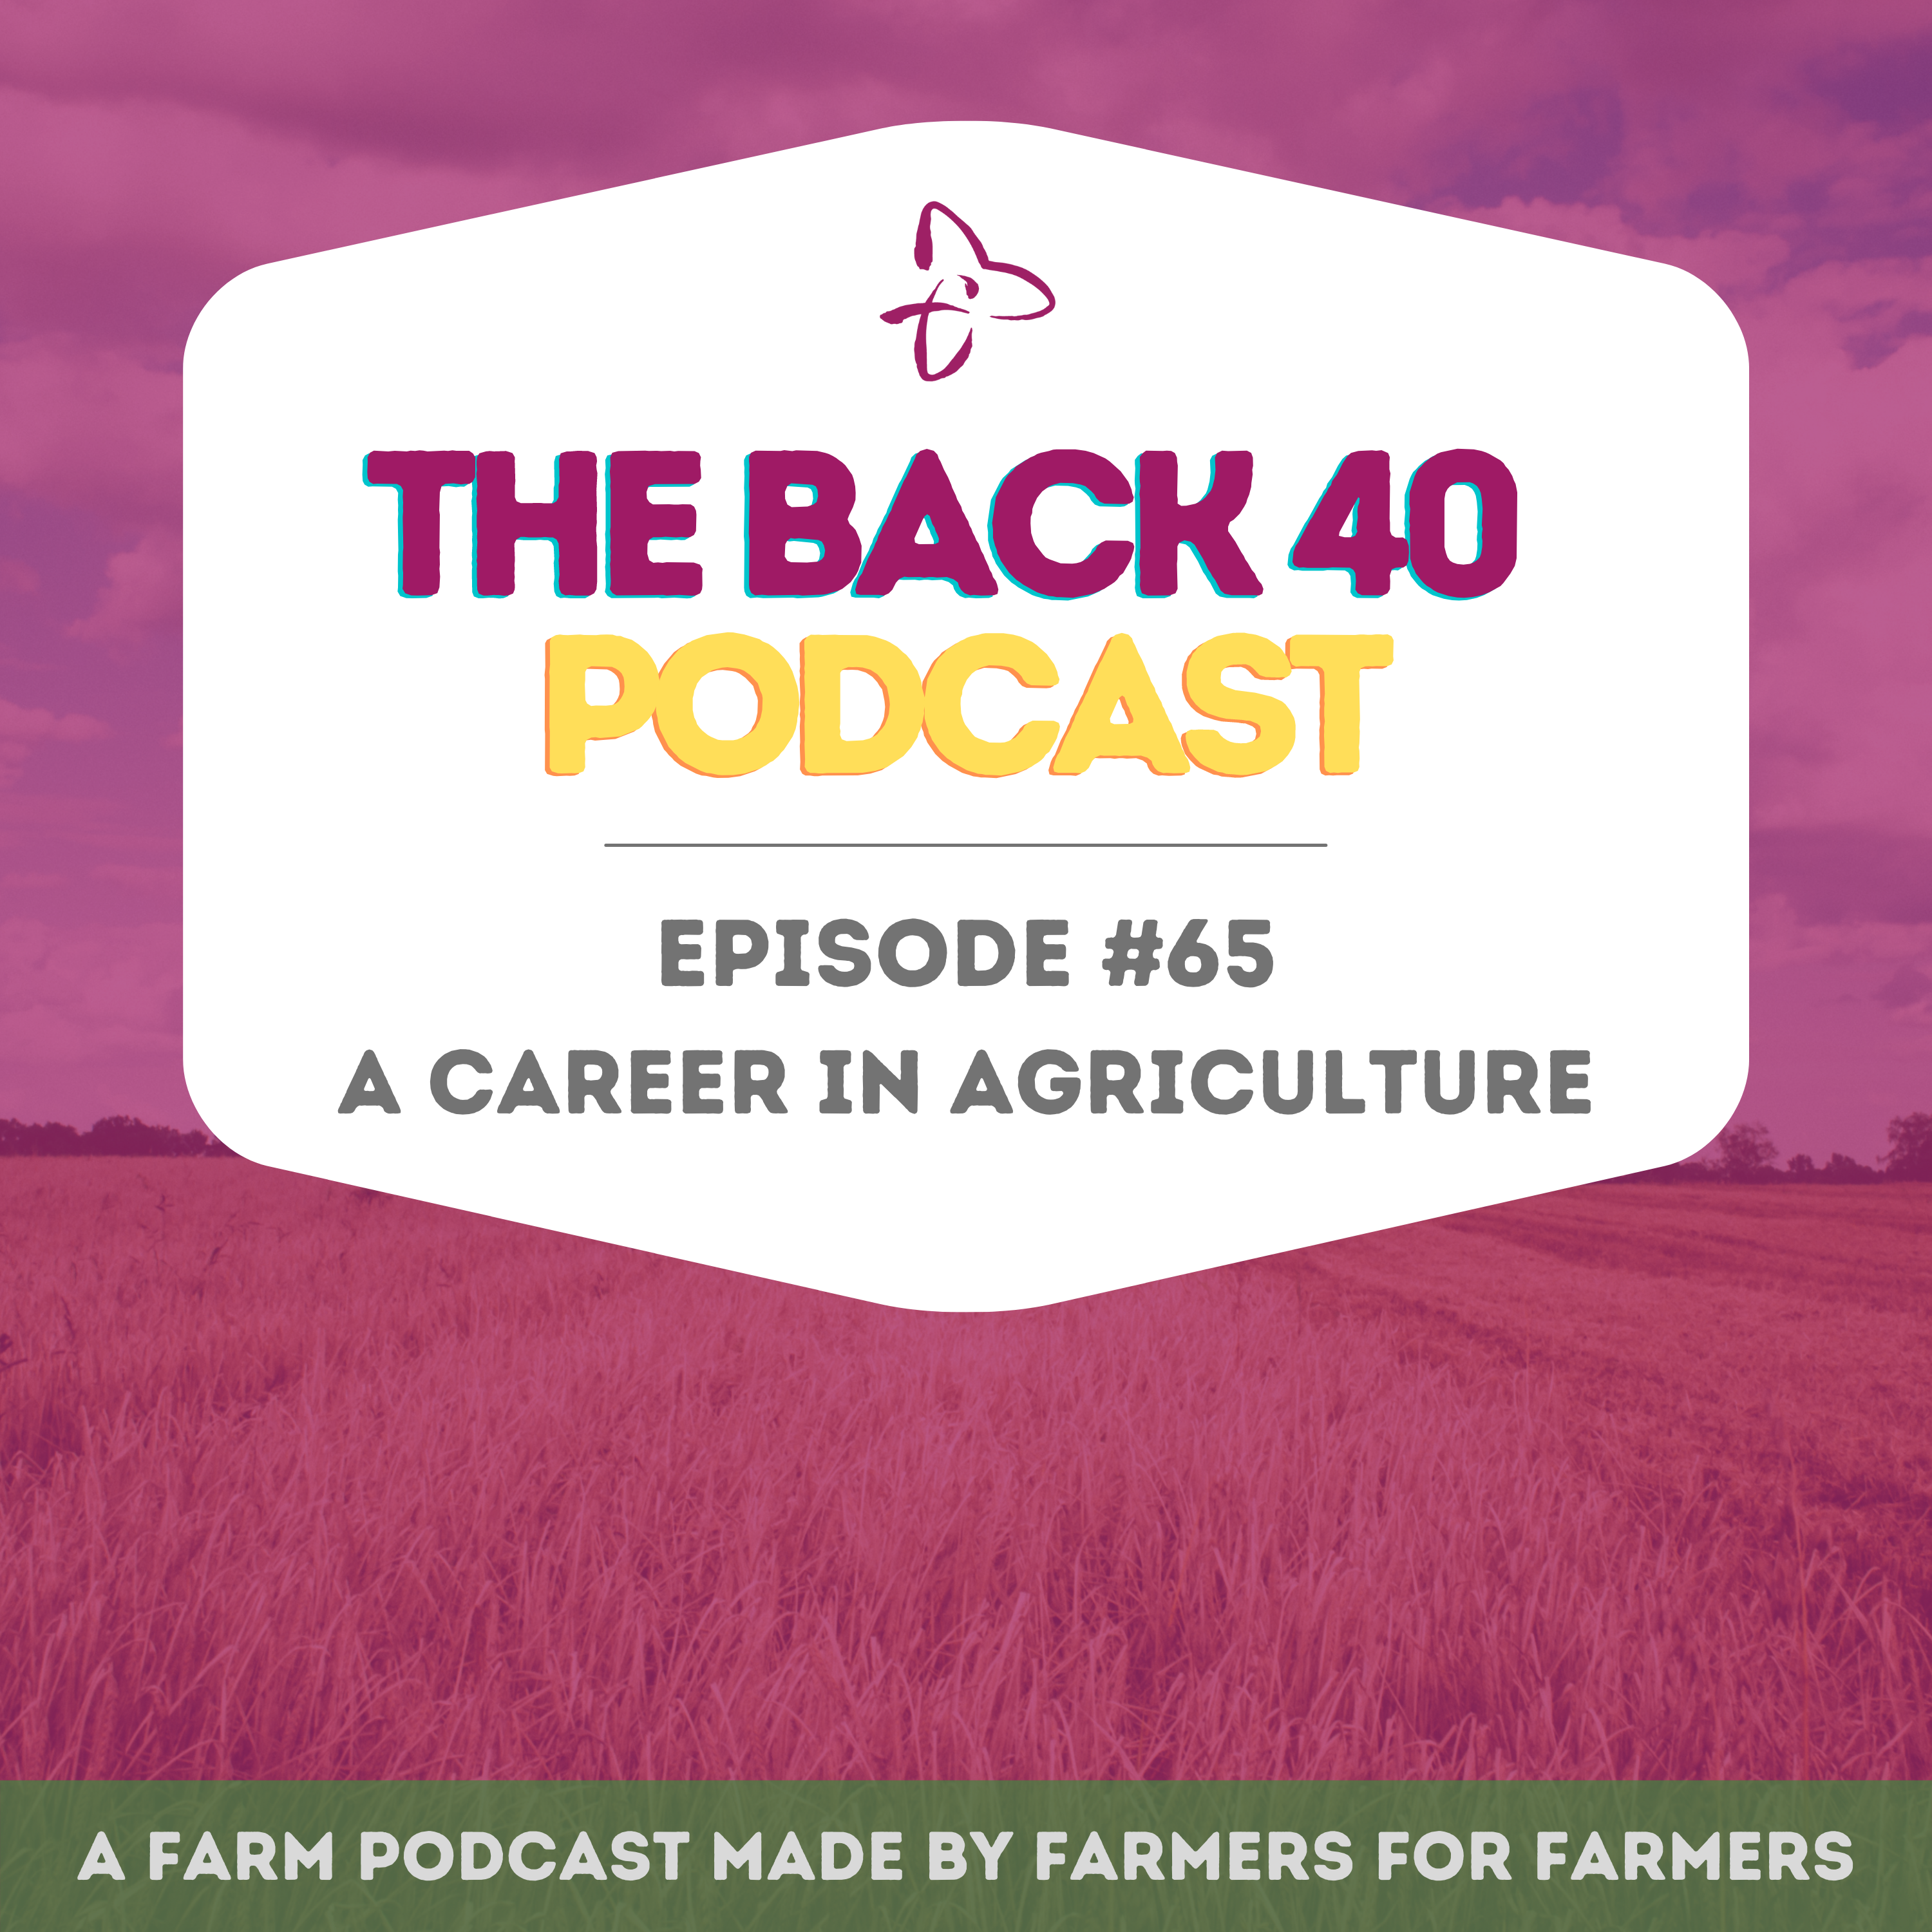 A Career in Agriculture